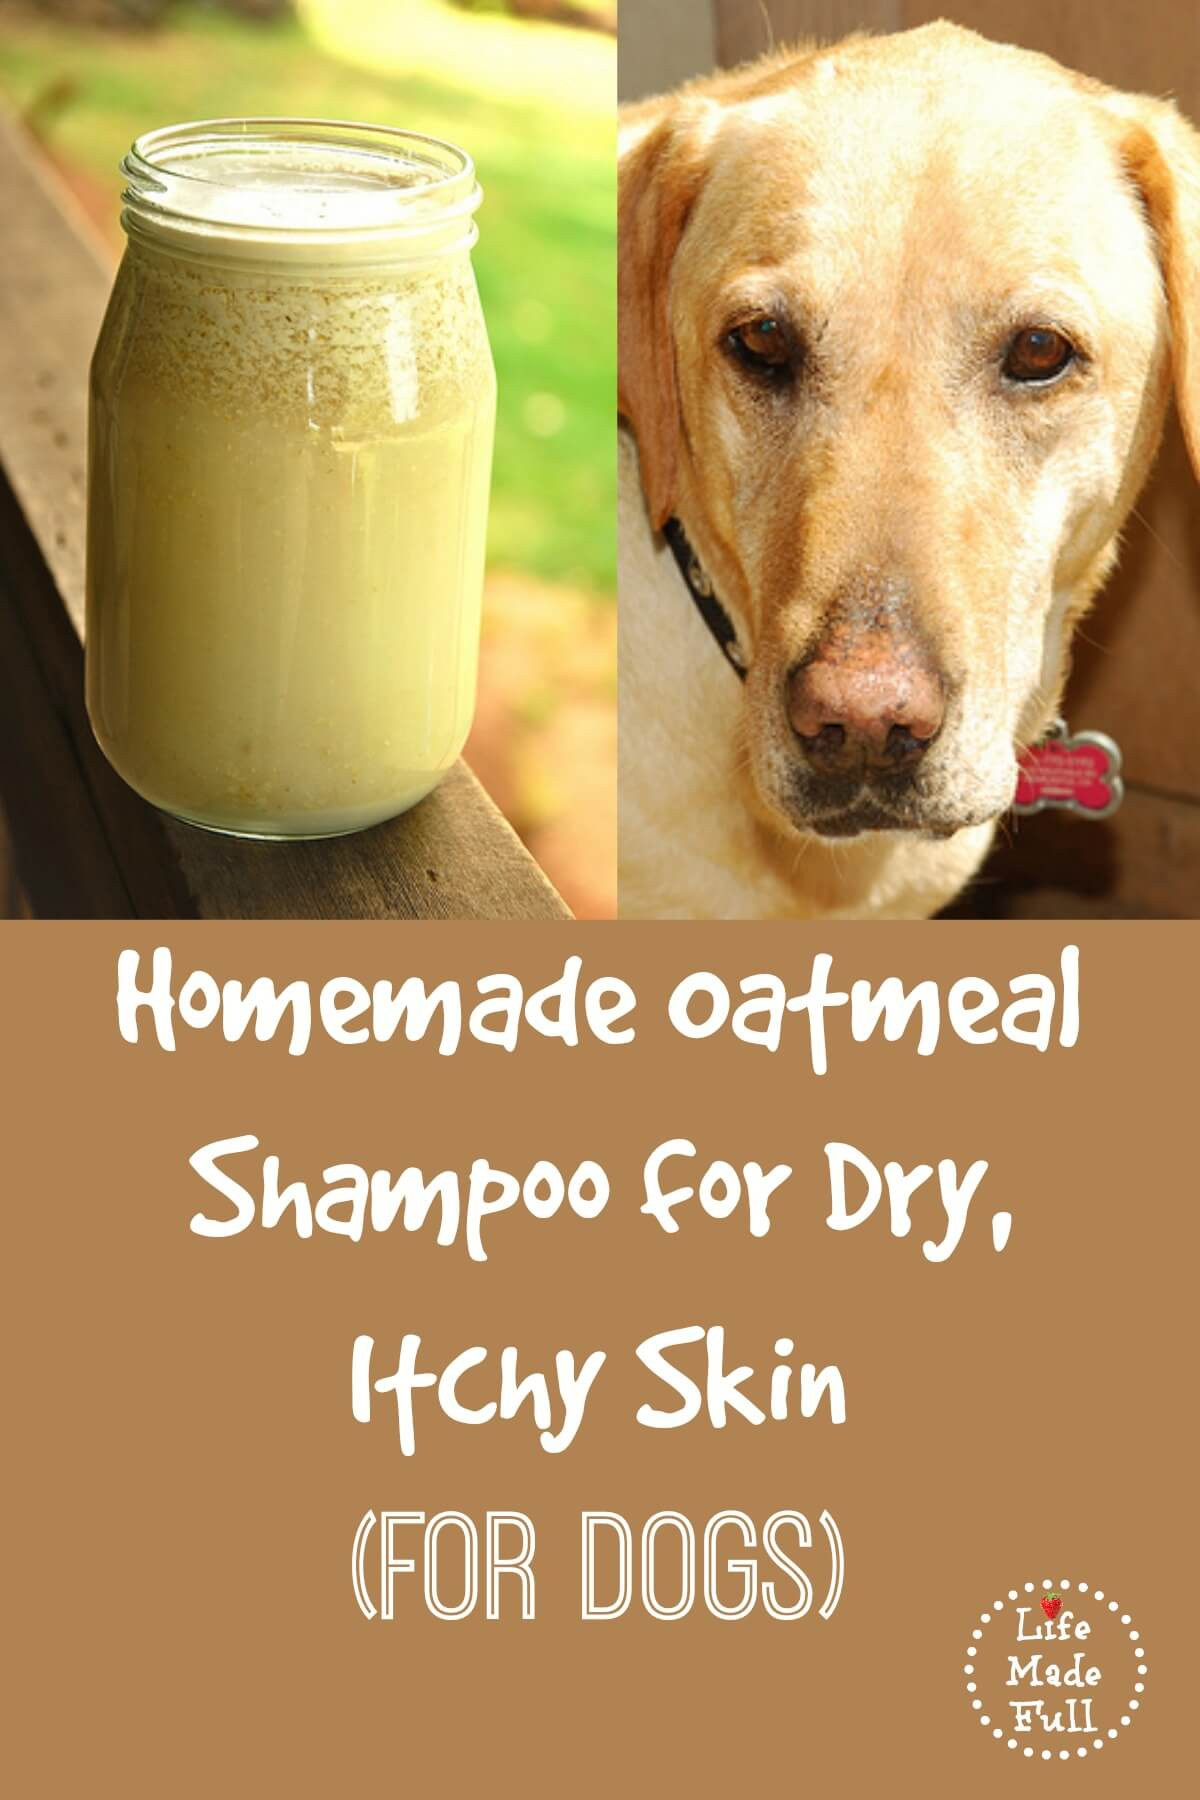 DIY Oatmeal Bath For Dogs
 The Best Homemade Shampoo for Dogs